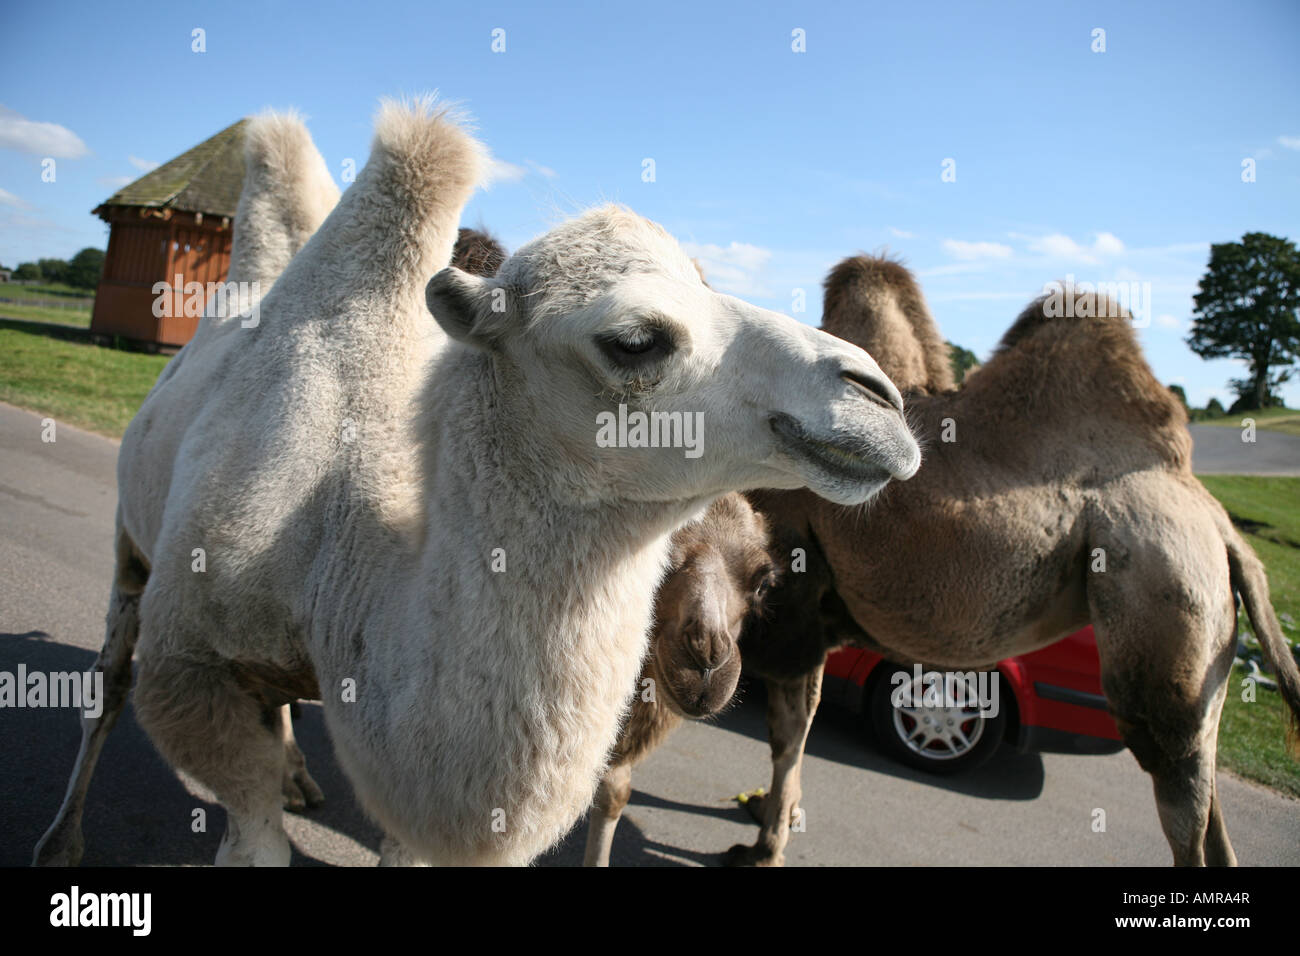 Two camels in safari park with car in background Stock Photo